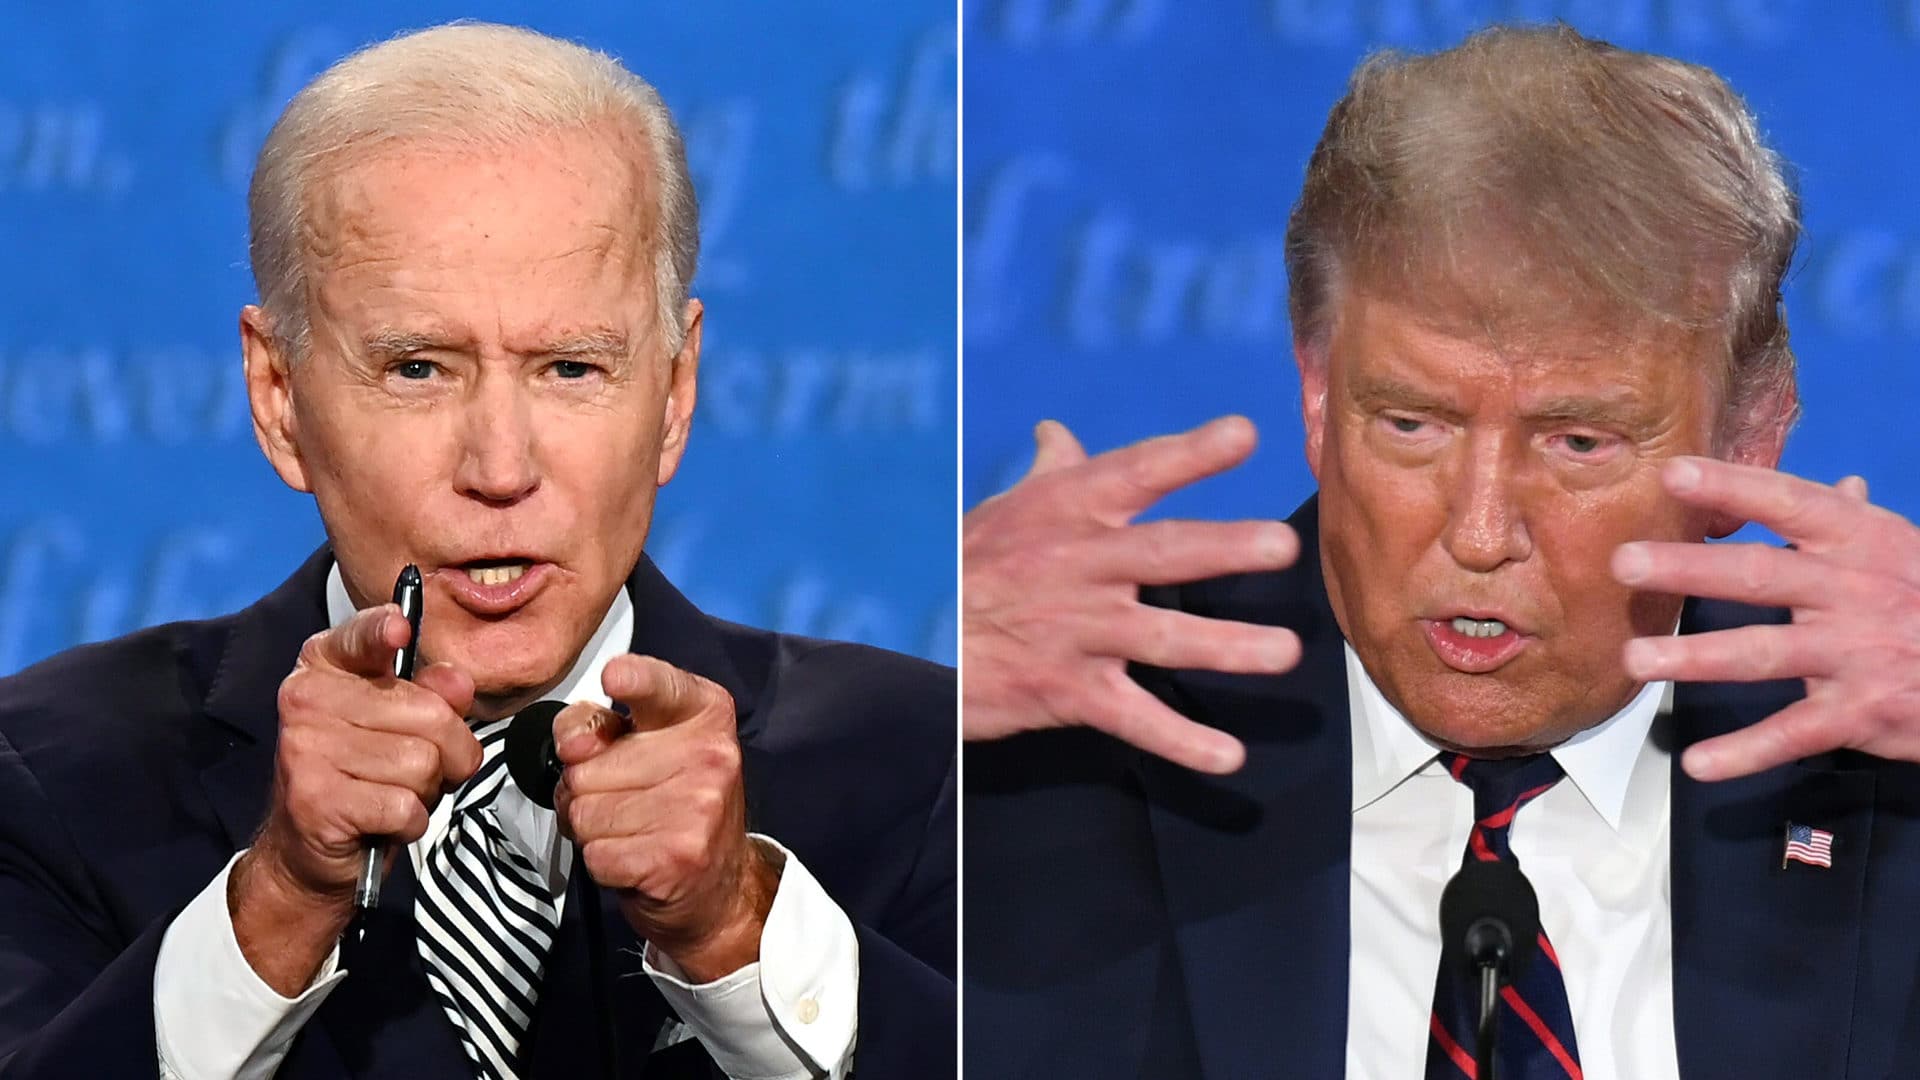 Democratic Presidential candidate and former U.S. Vice President Joe Biden (Left) and U.S. President Donald Trump (Right) speaking during the first presidential debate on September 29, 2020.